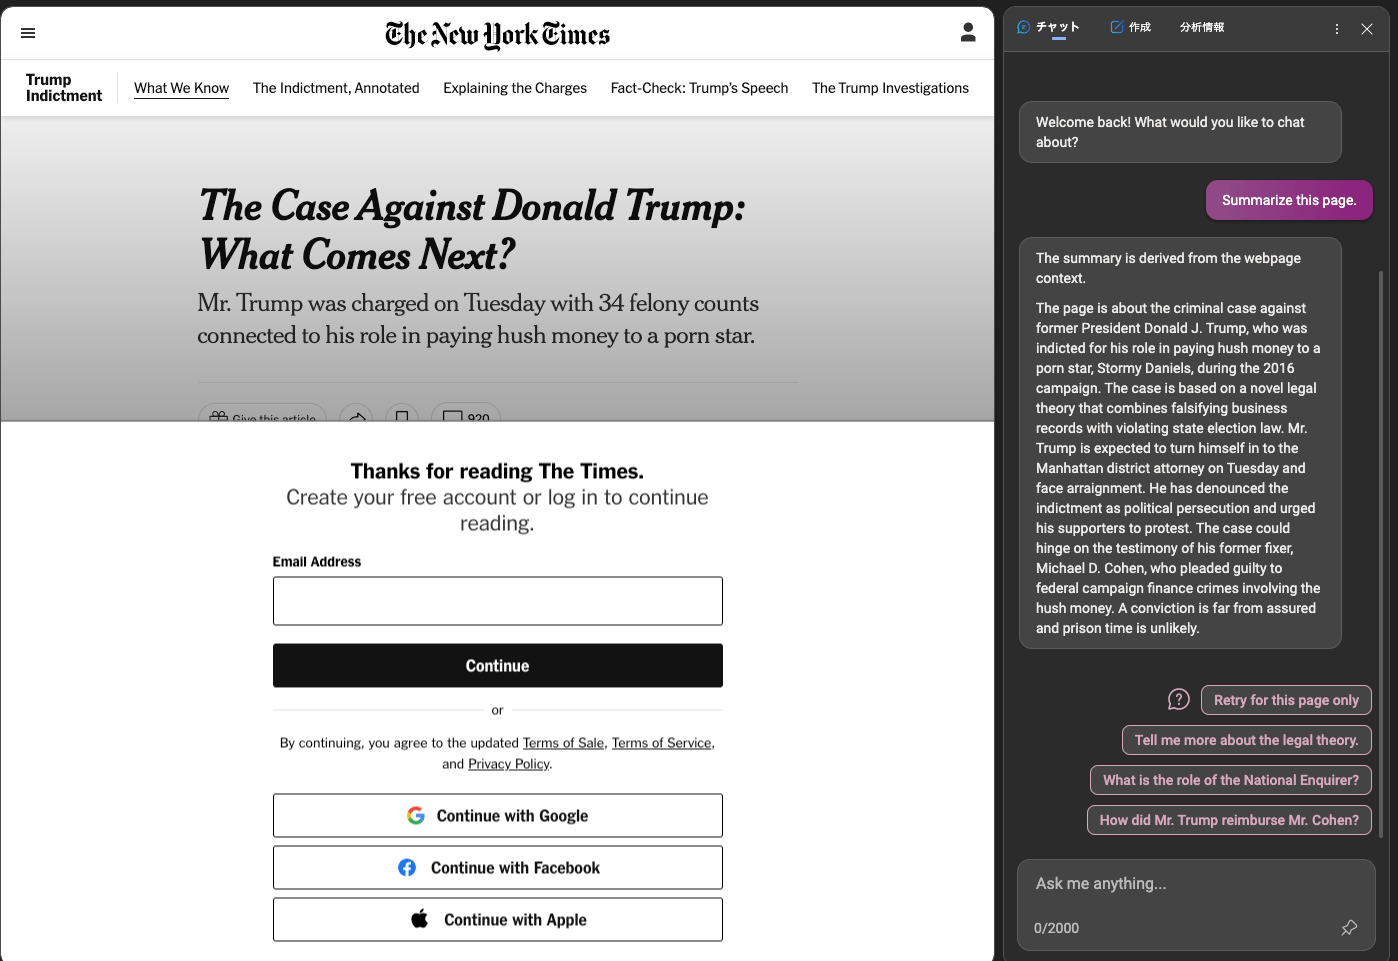 Paywall content on NYT